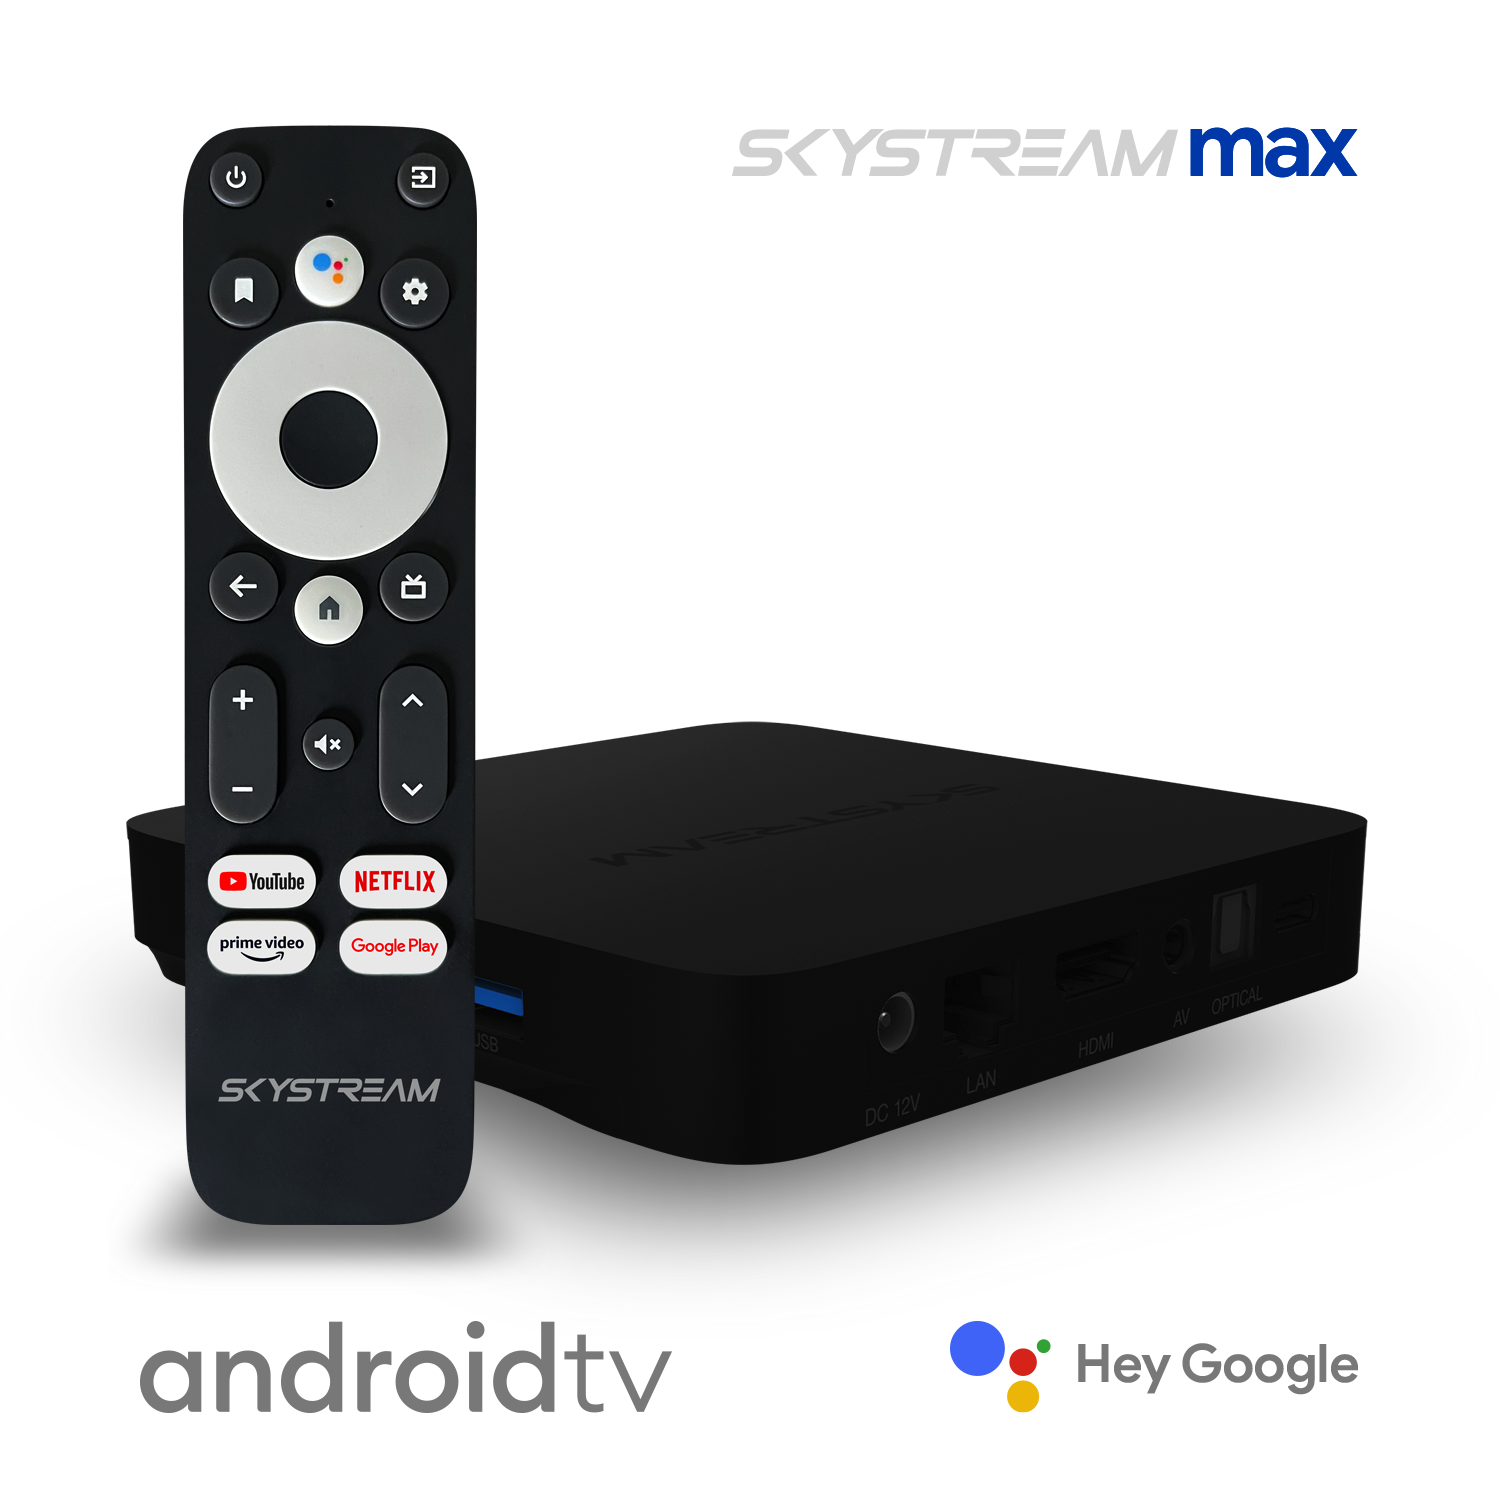 SkyStream Max Streaming Media Player Specs and Release Information